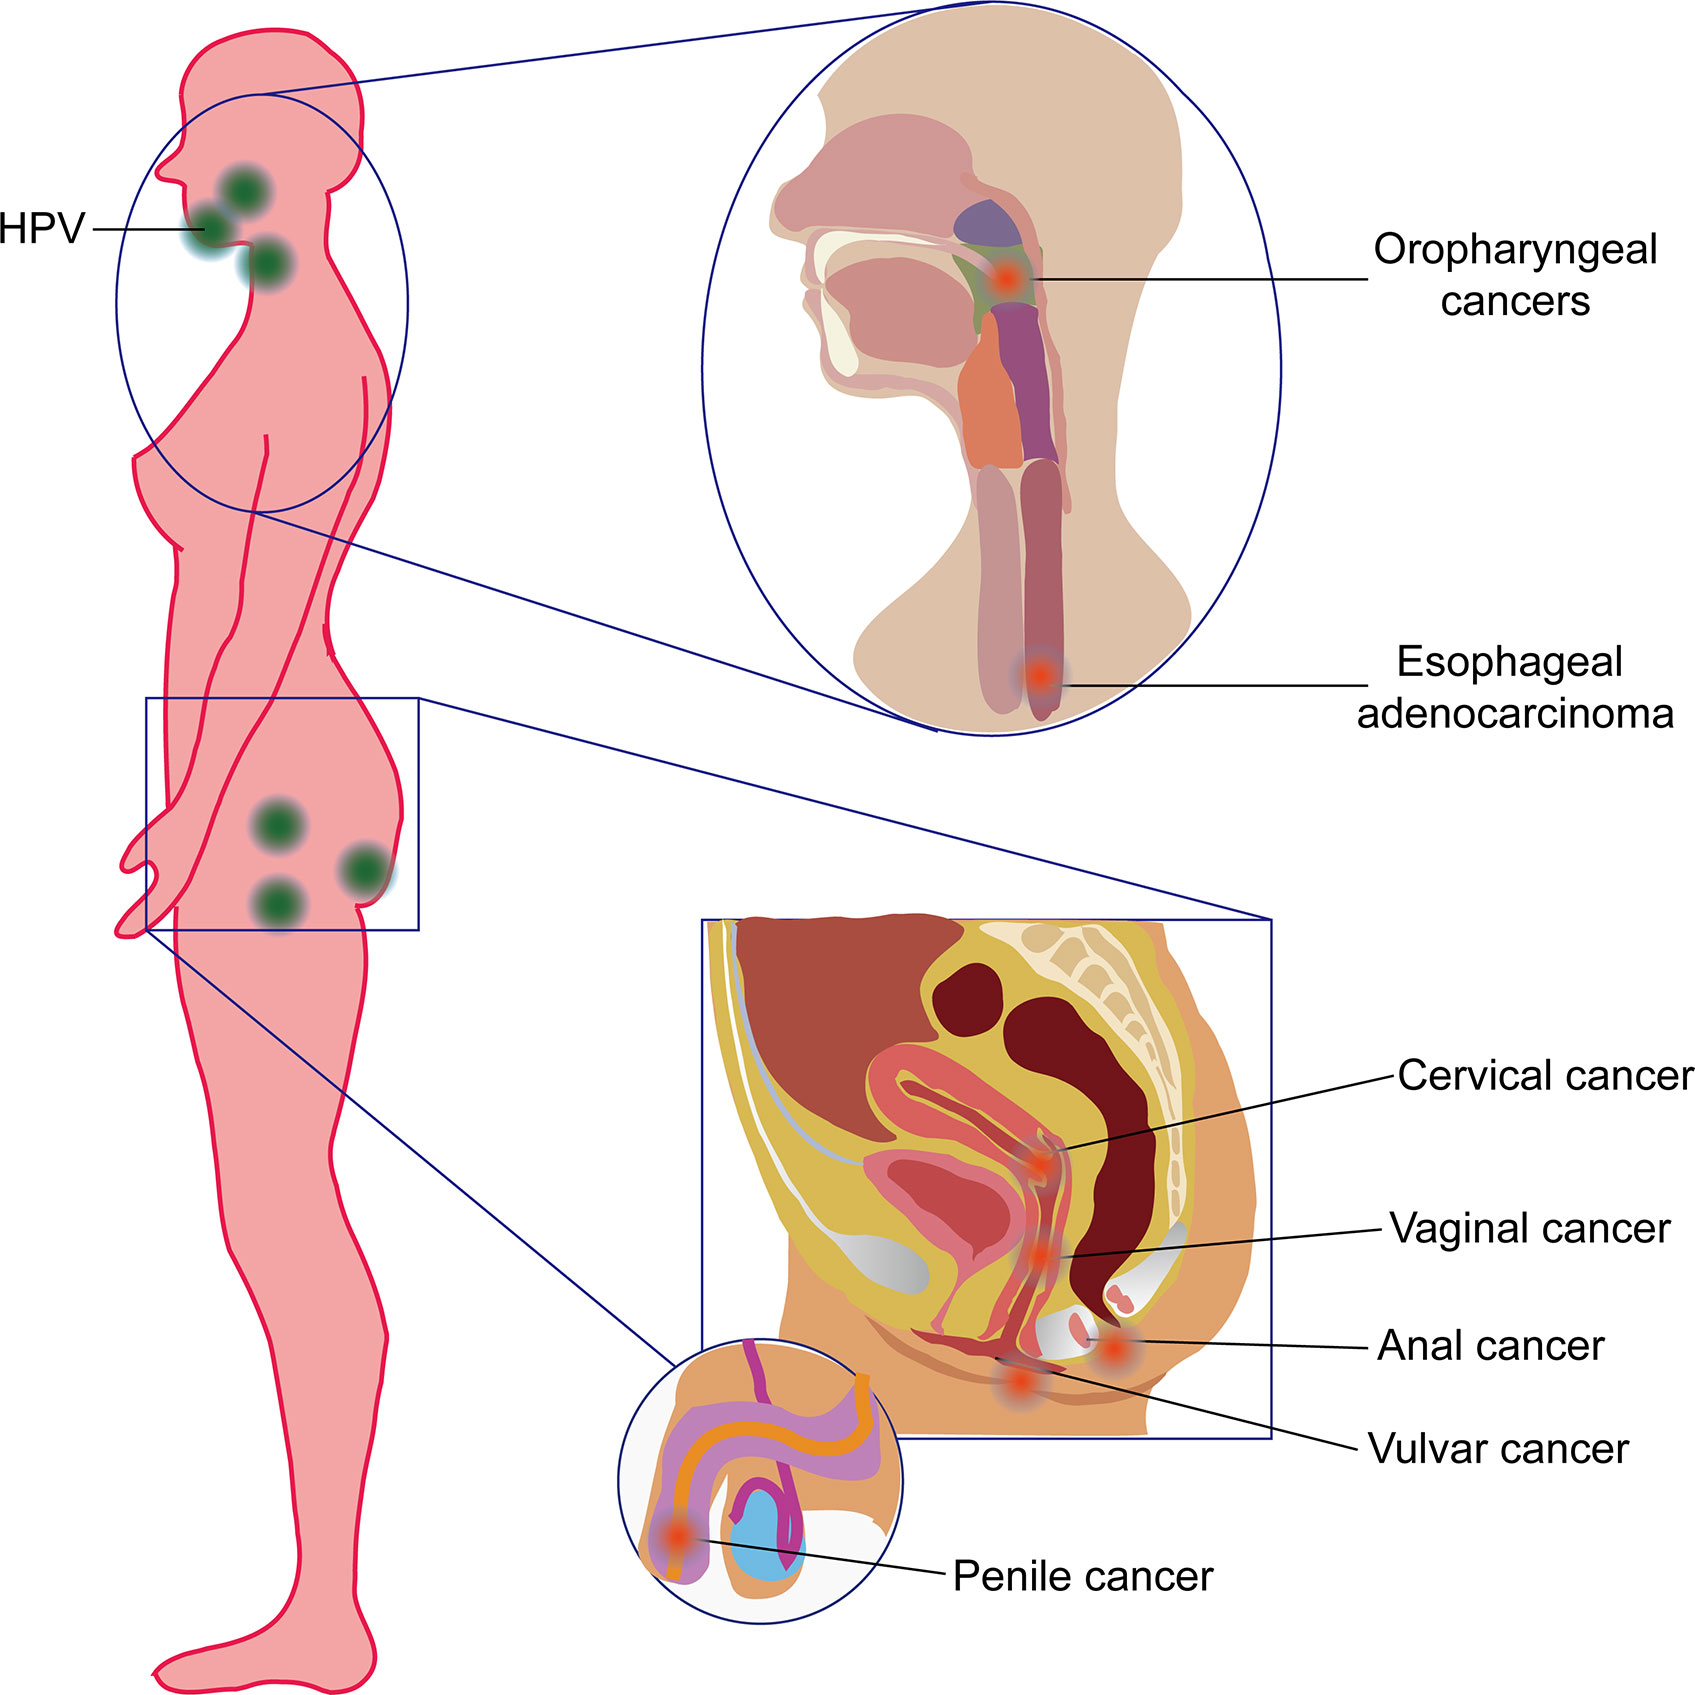 Can hpv cause esophageal cancer. Can hpv cause esophageal cancer